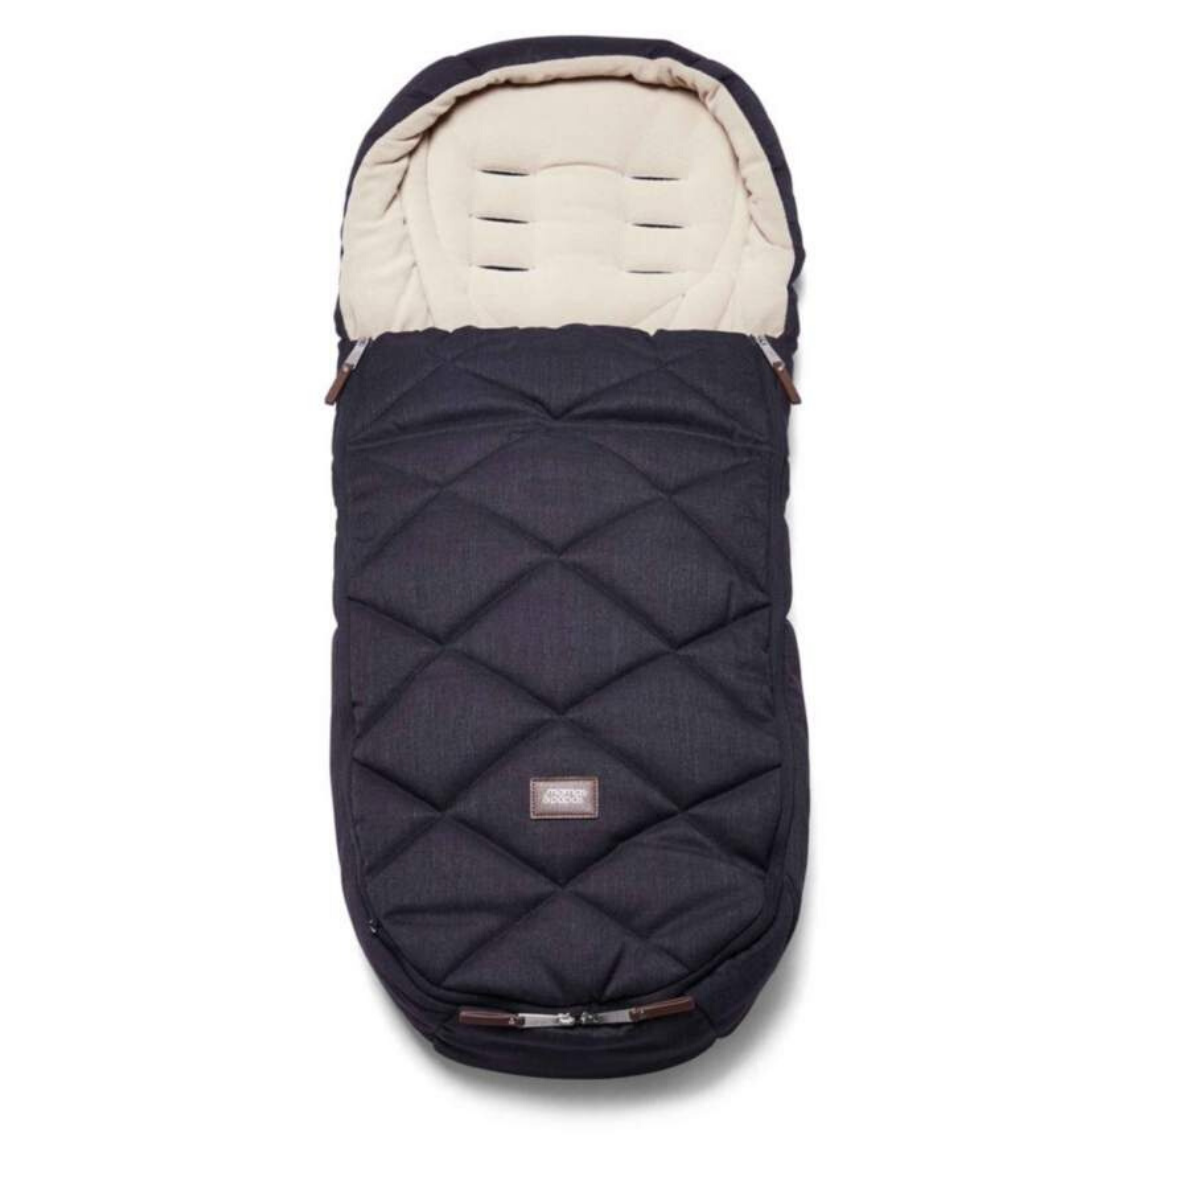 mamas and papas all weather footmuff